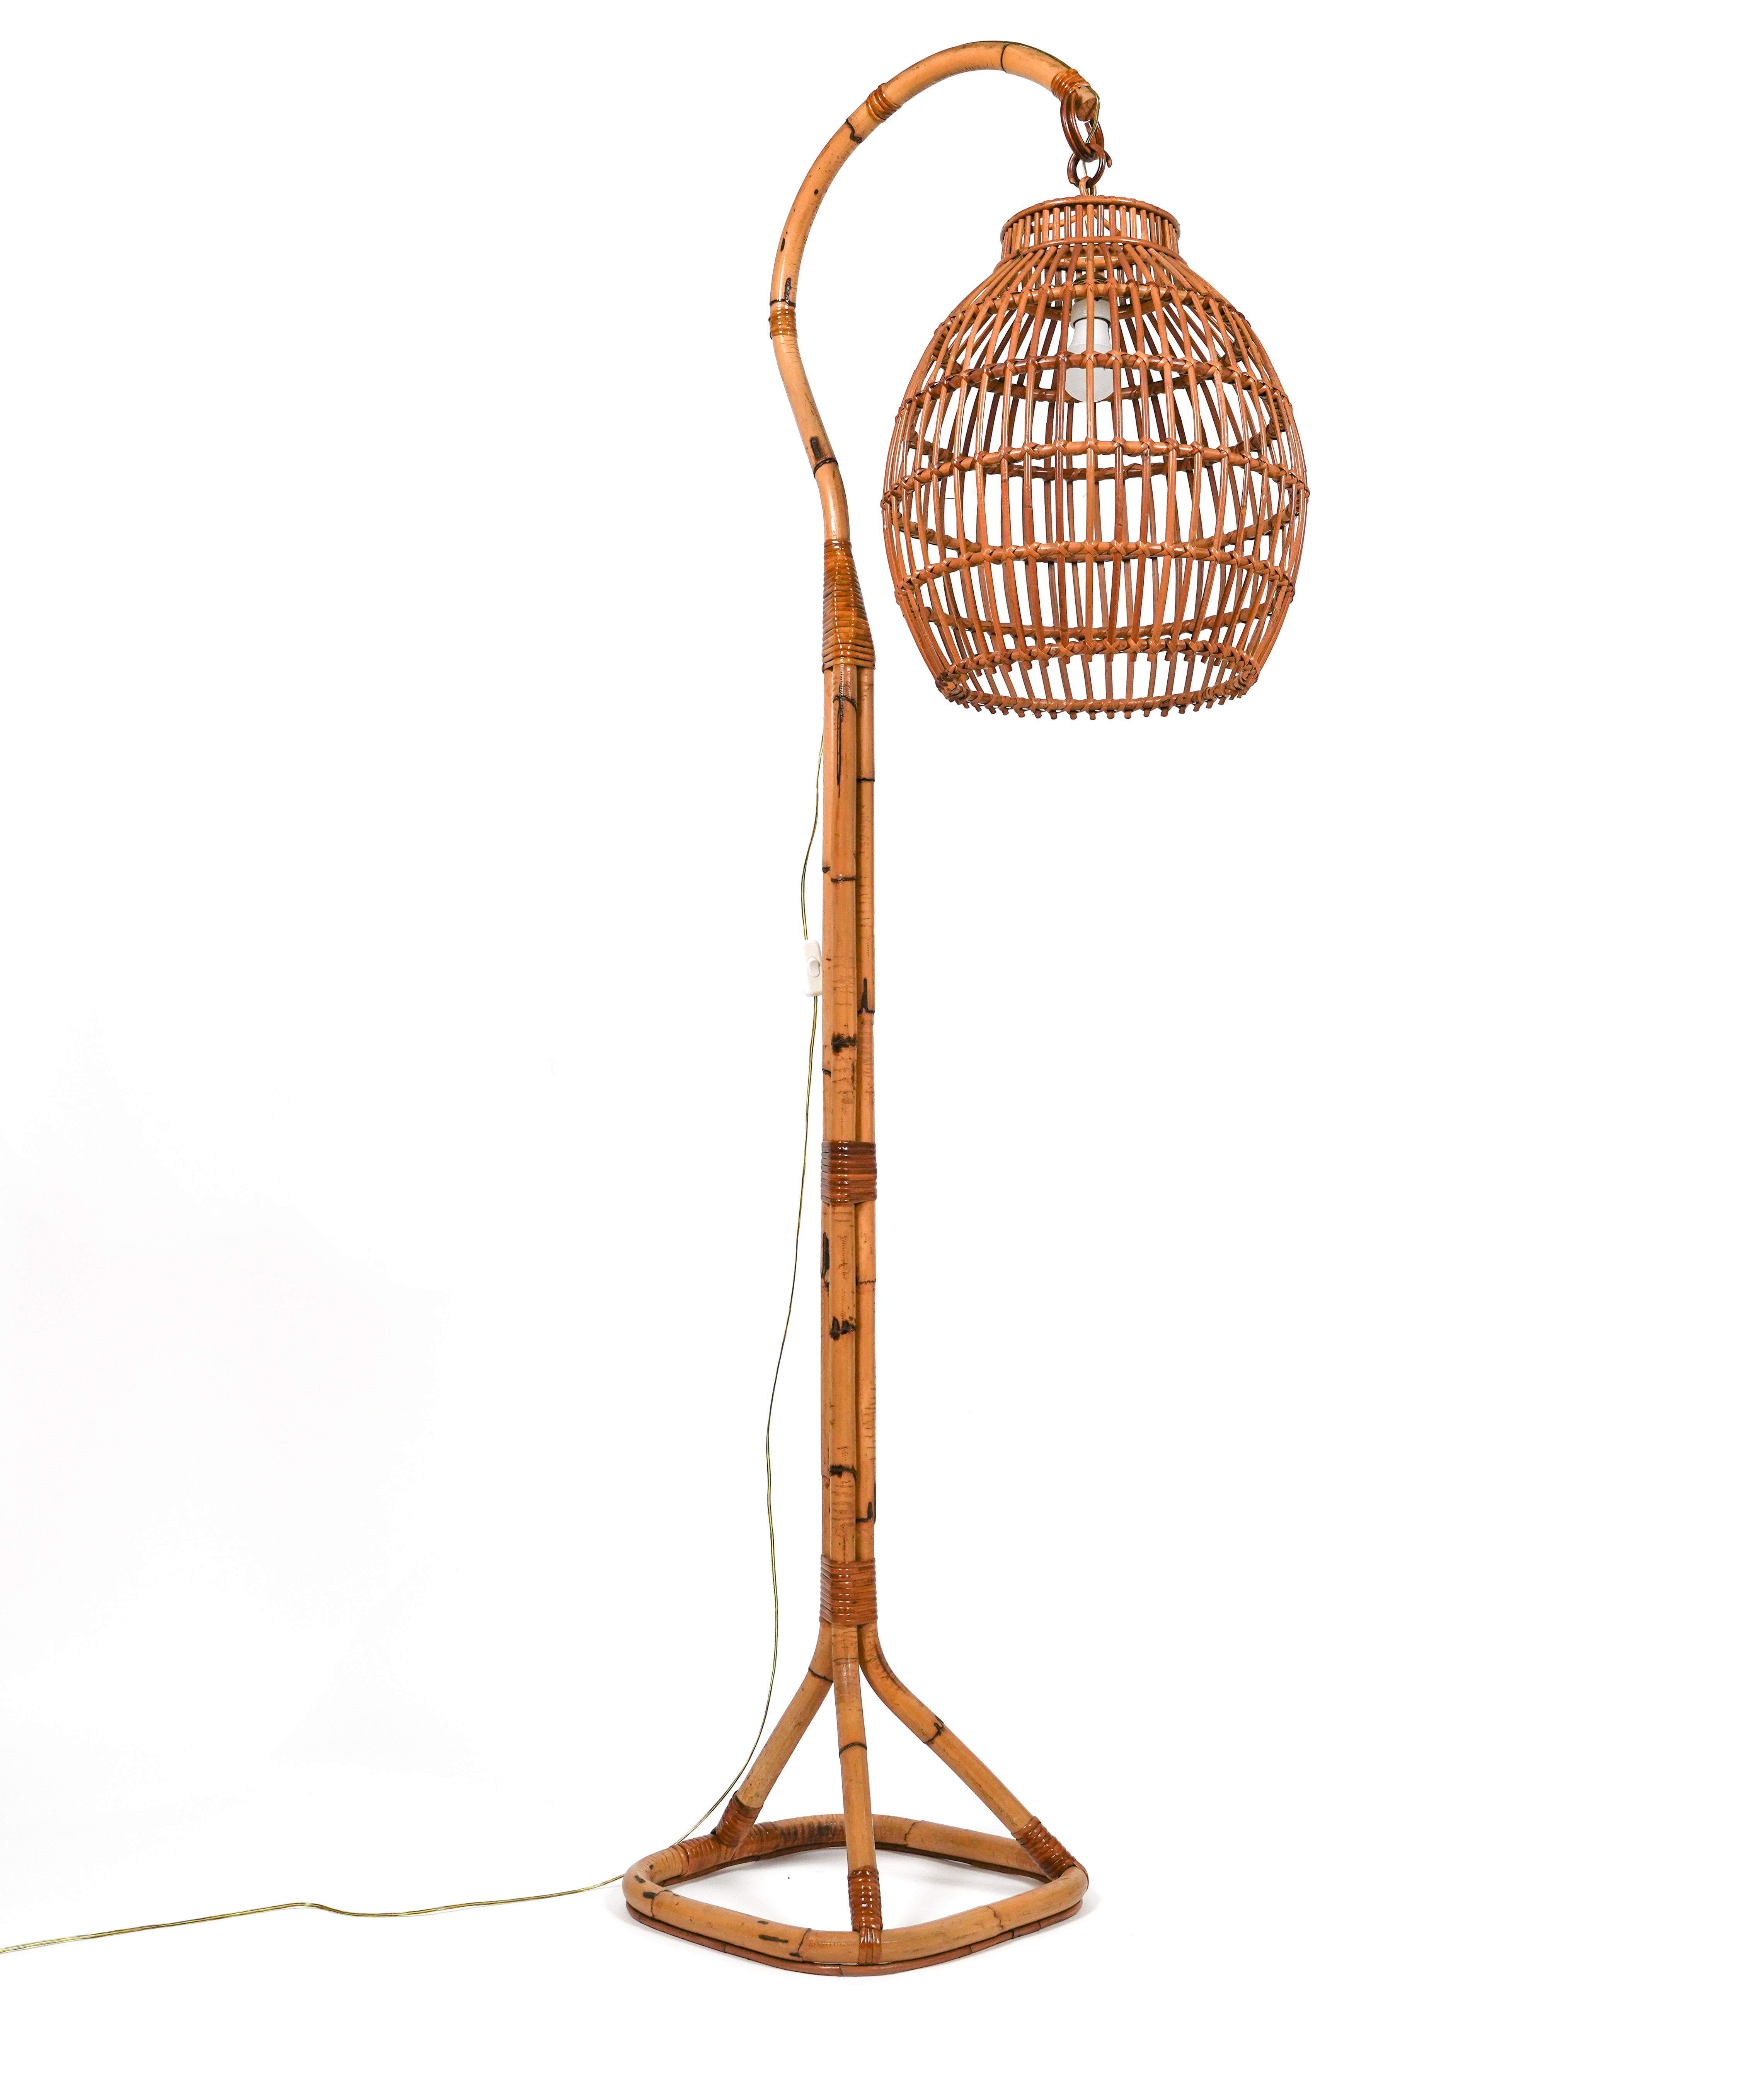 Midcentury Rattan and Bamboo Floor Lamp Louis Sognot Style, Italy 1960s For Sale 5